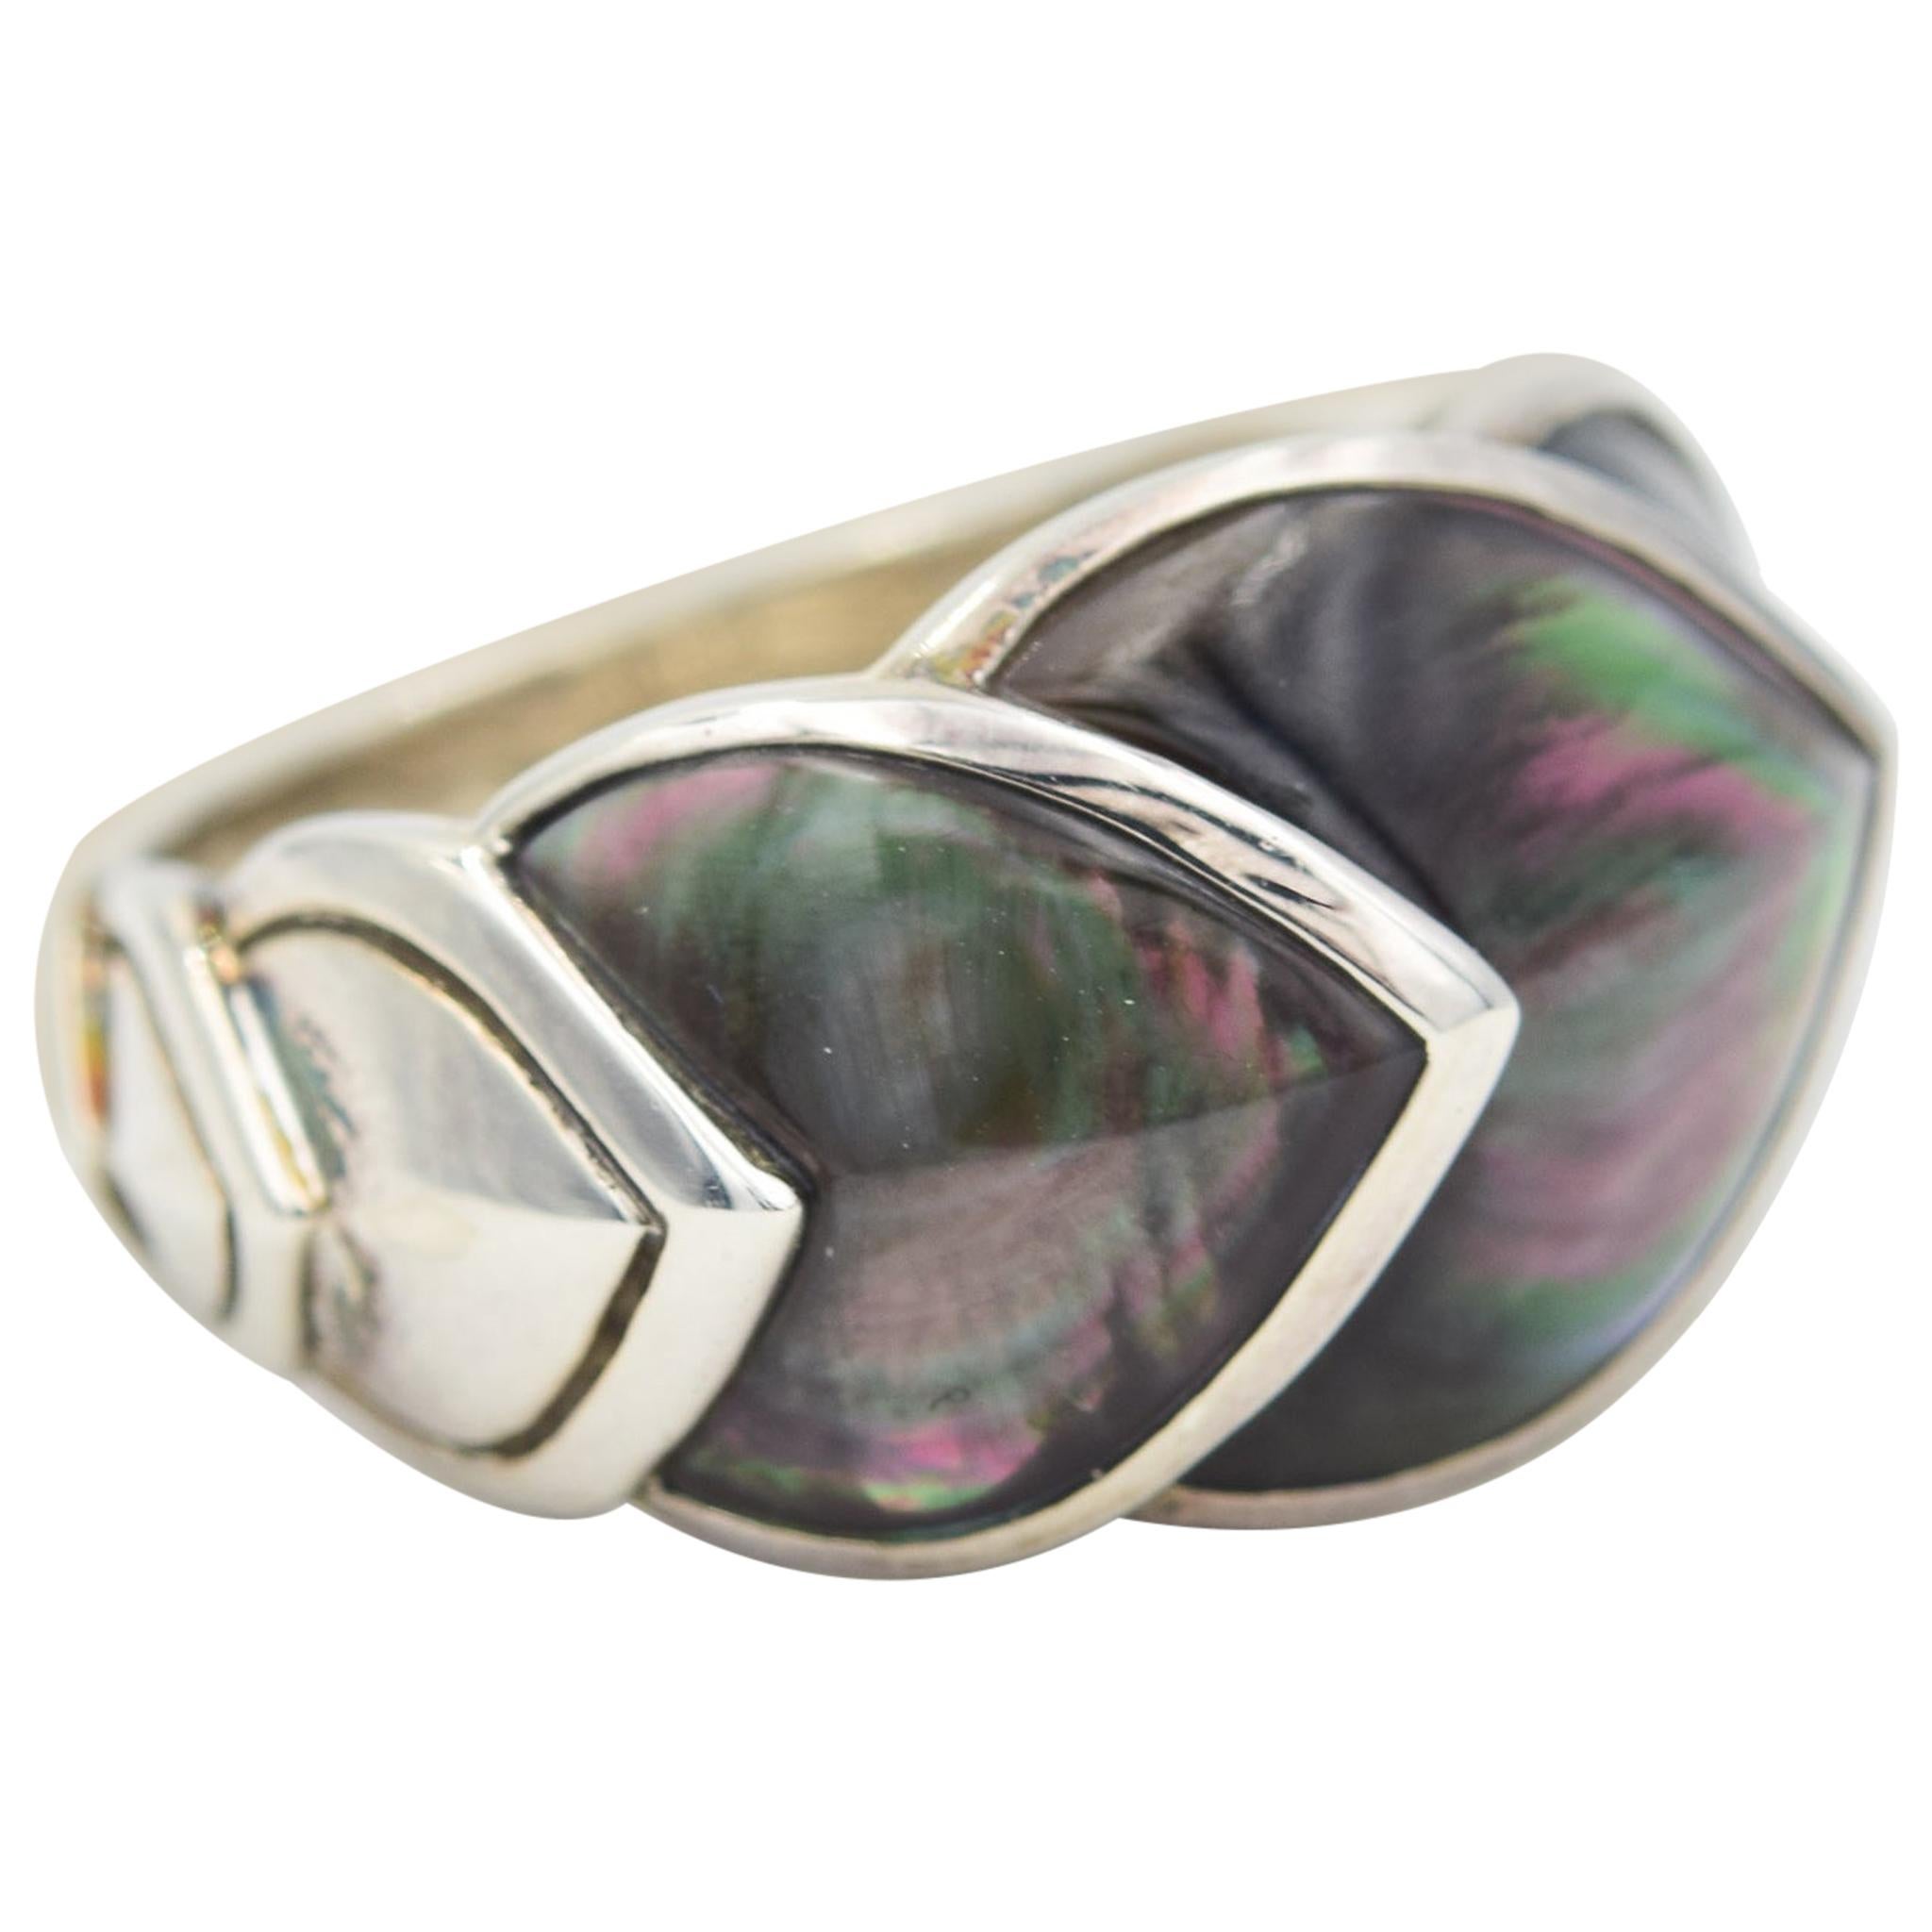 John Hardy Legends Naga Mother of Pearl Dragon Scale Ring, RBS66475GMOPX7